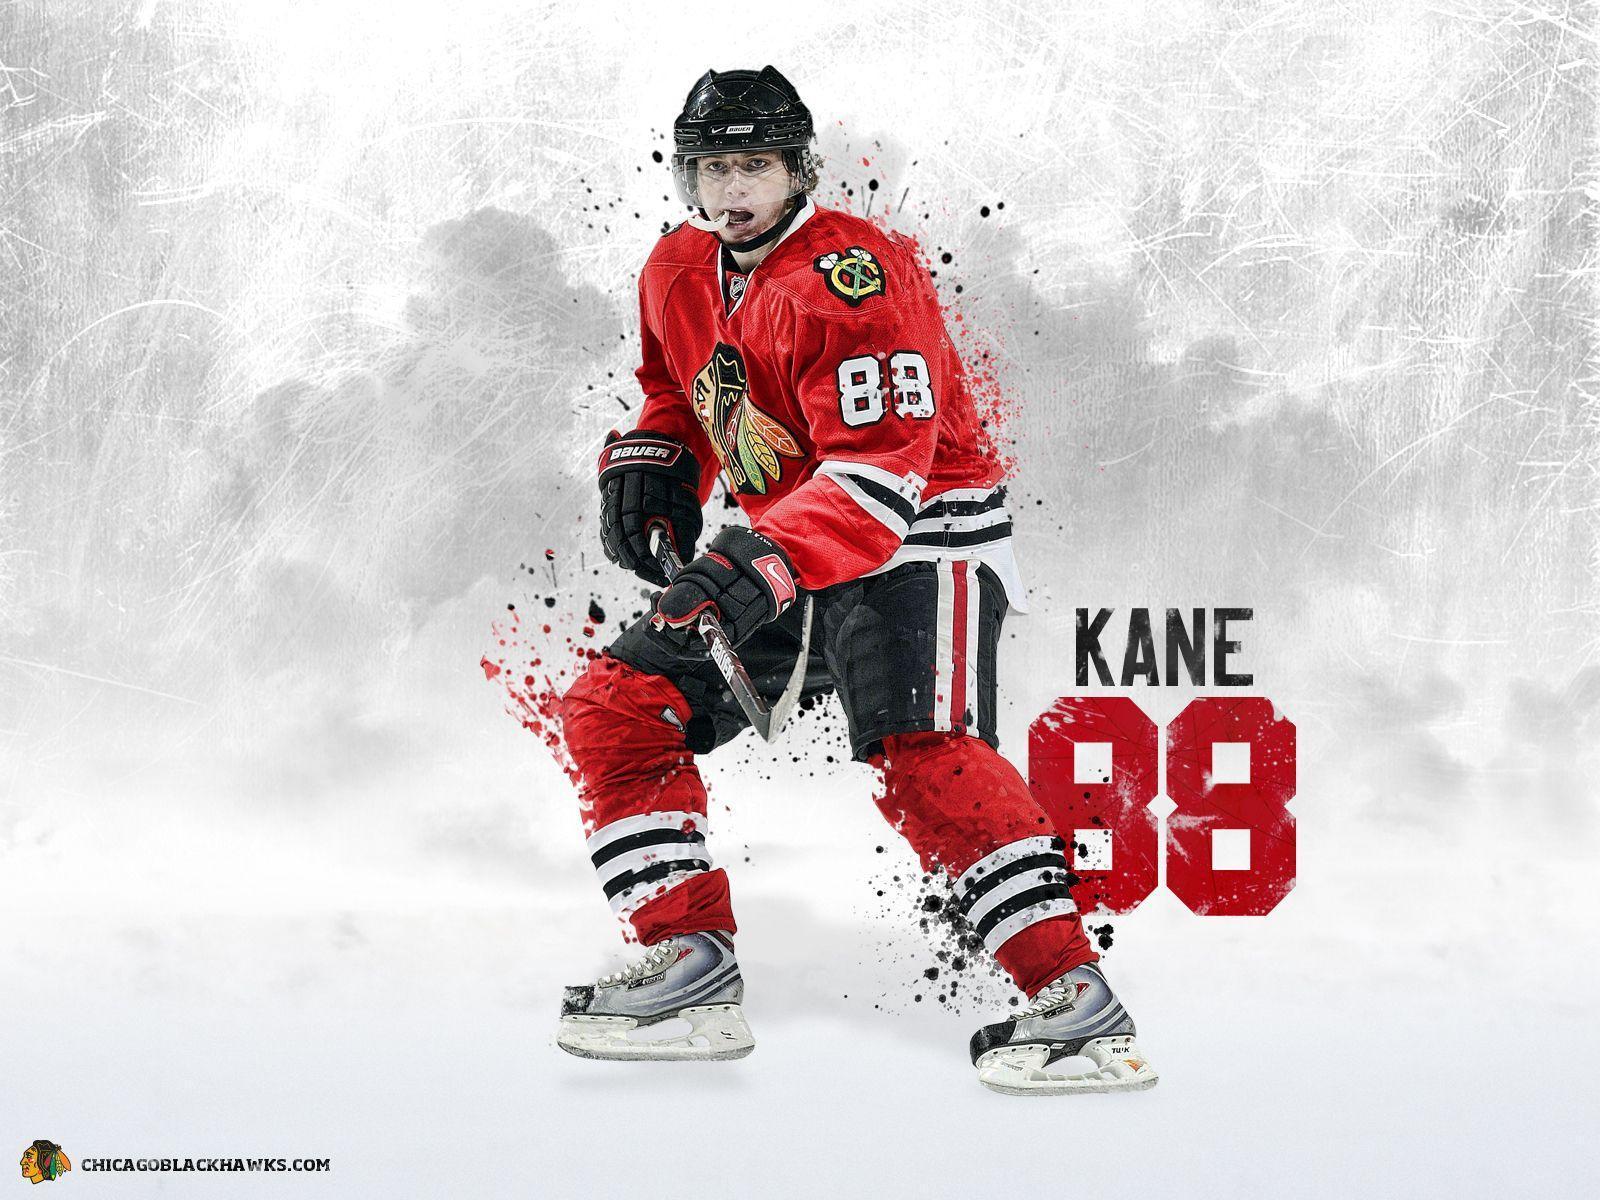 Hockey wallpaper, hockey players picture